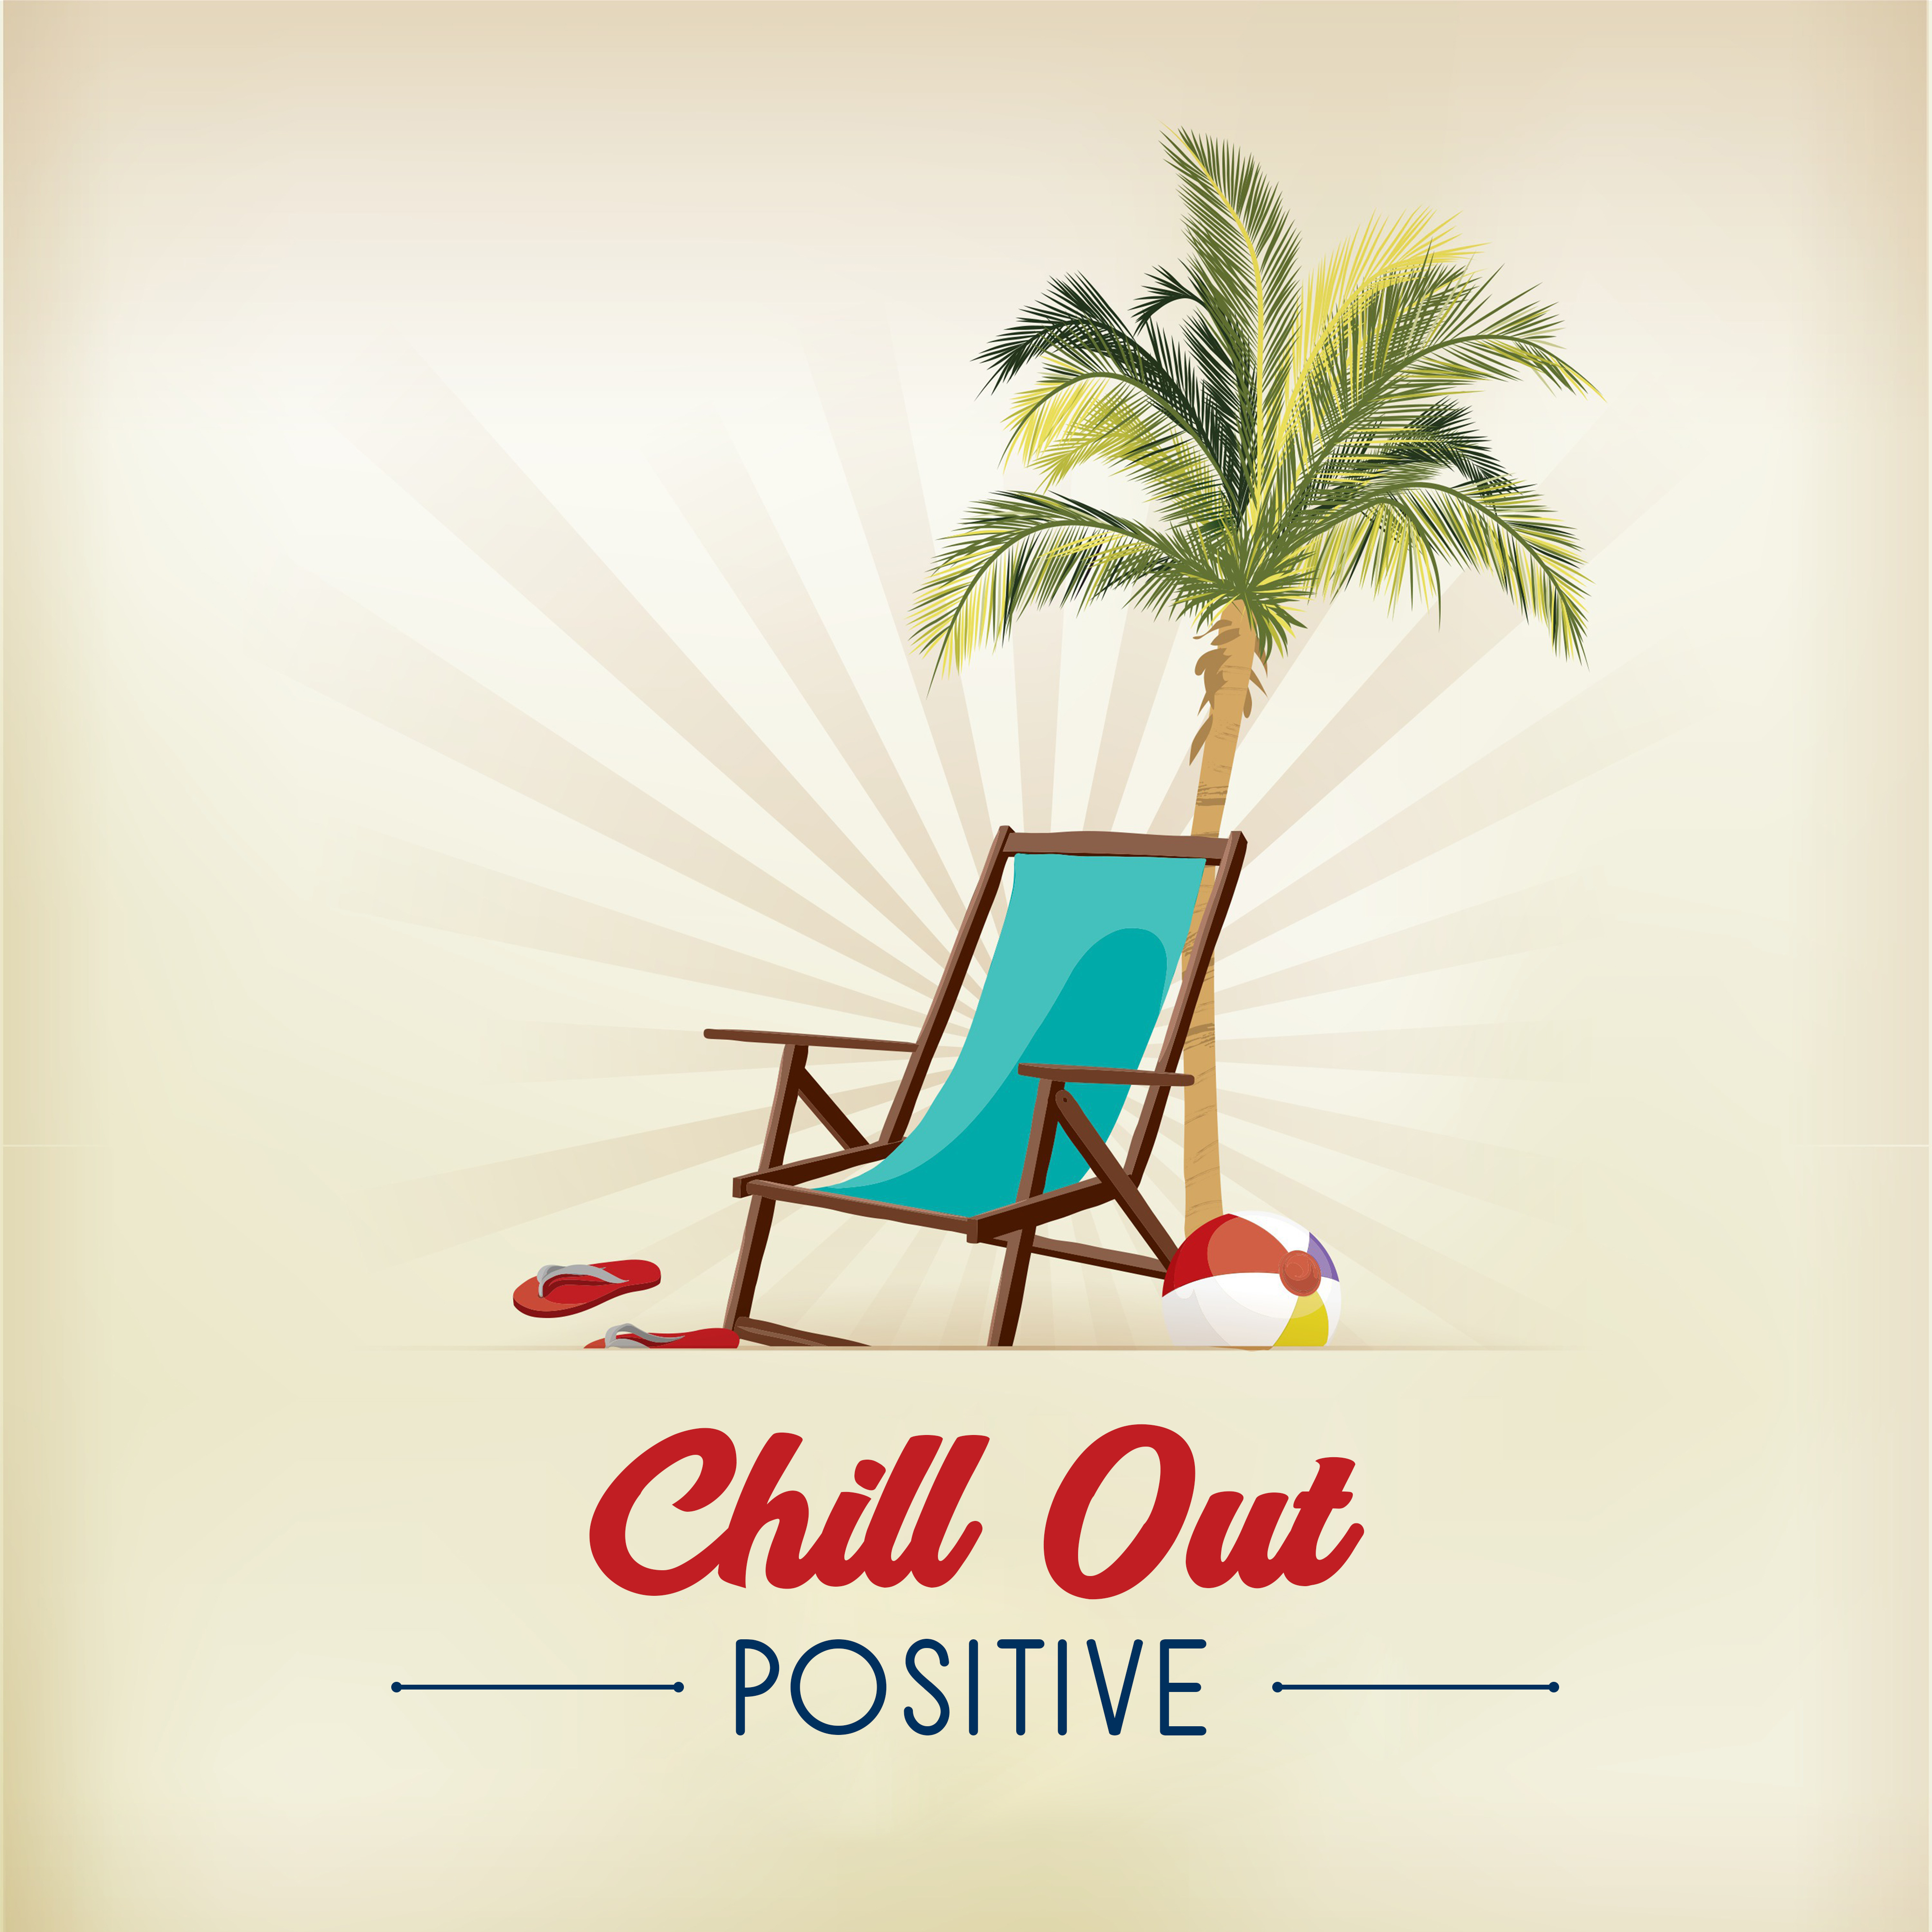 Chill Out Positive – Summer Music, Chill Out 2017, Garden Party, Relax by The Pool